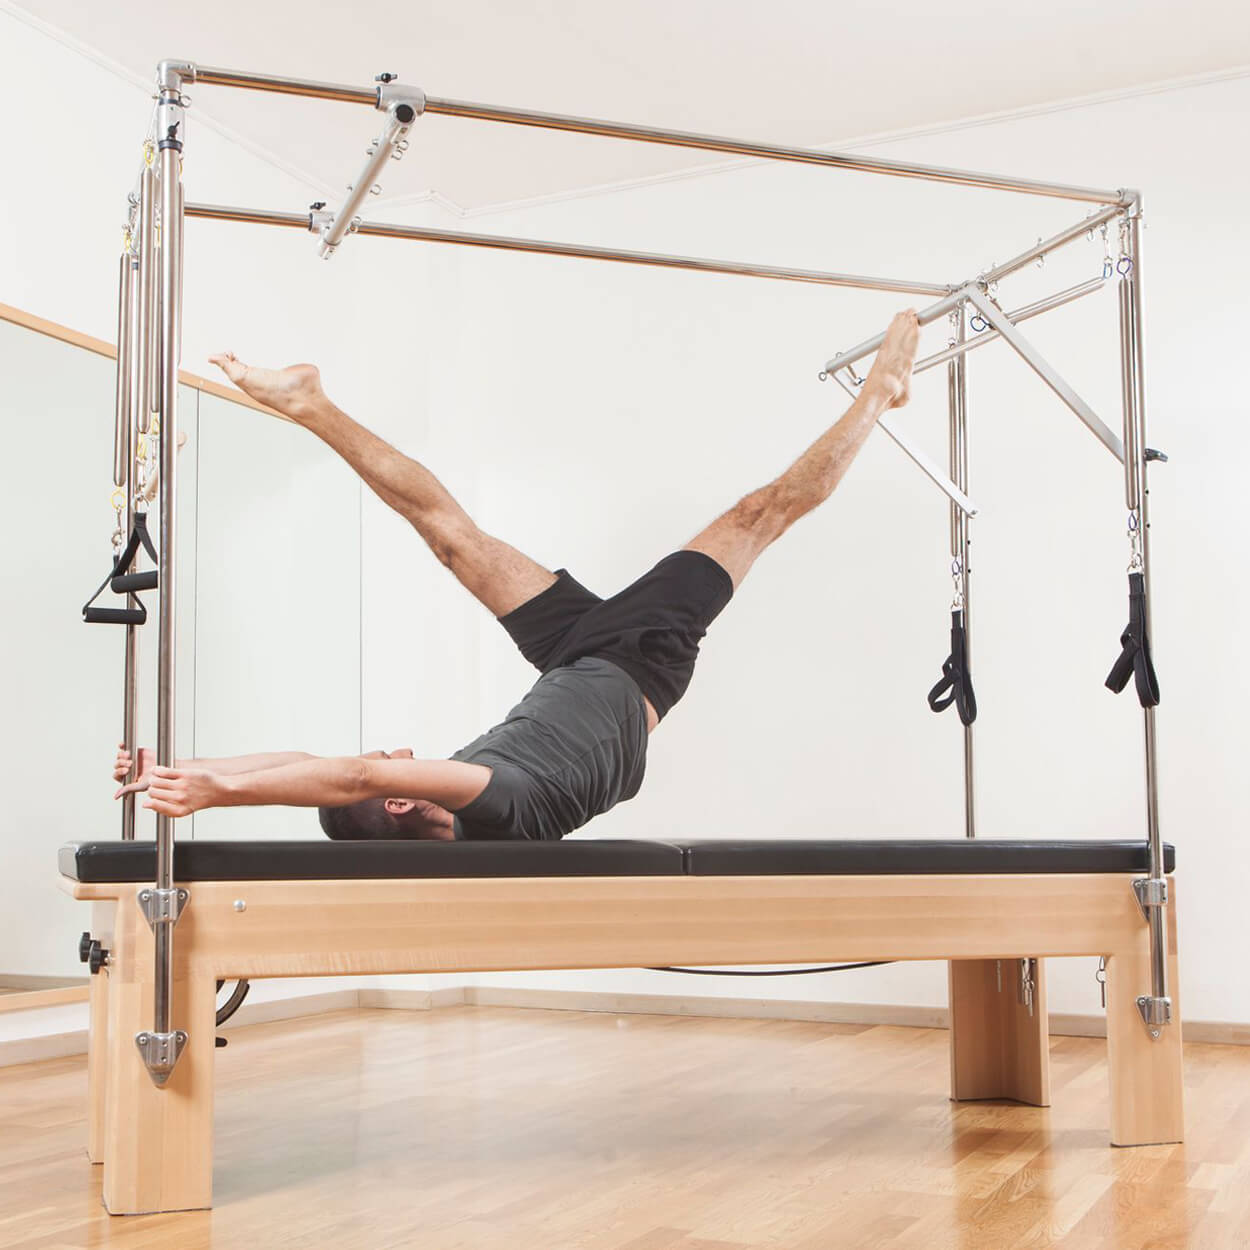 Affordable reformer For Sale, Exercise & Fitness